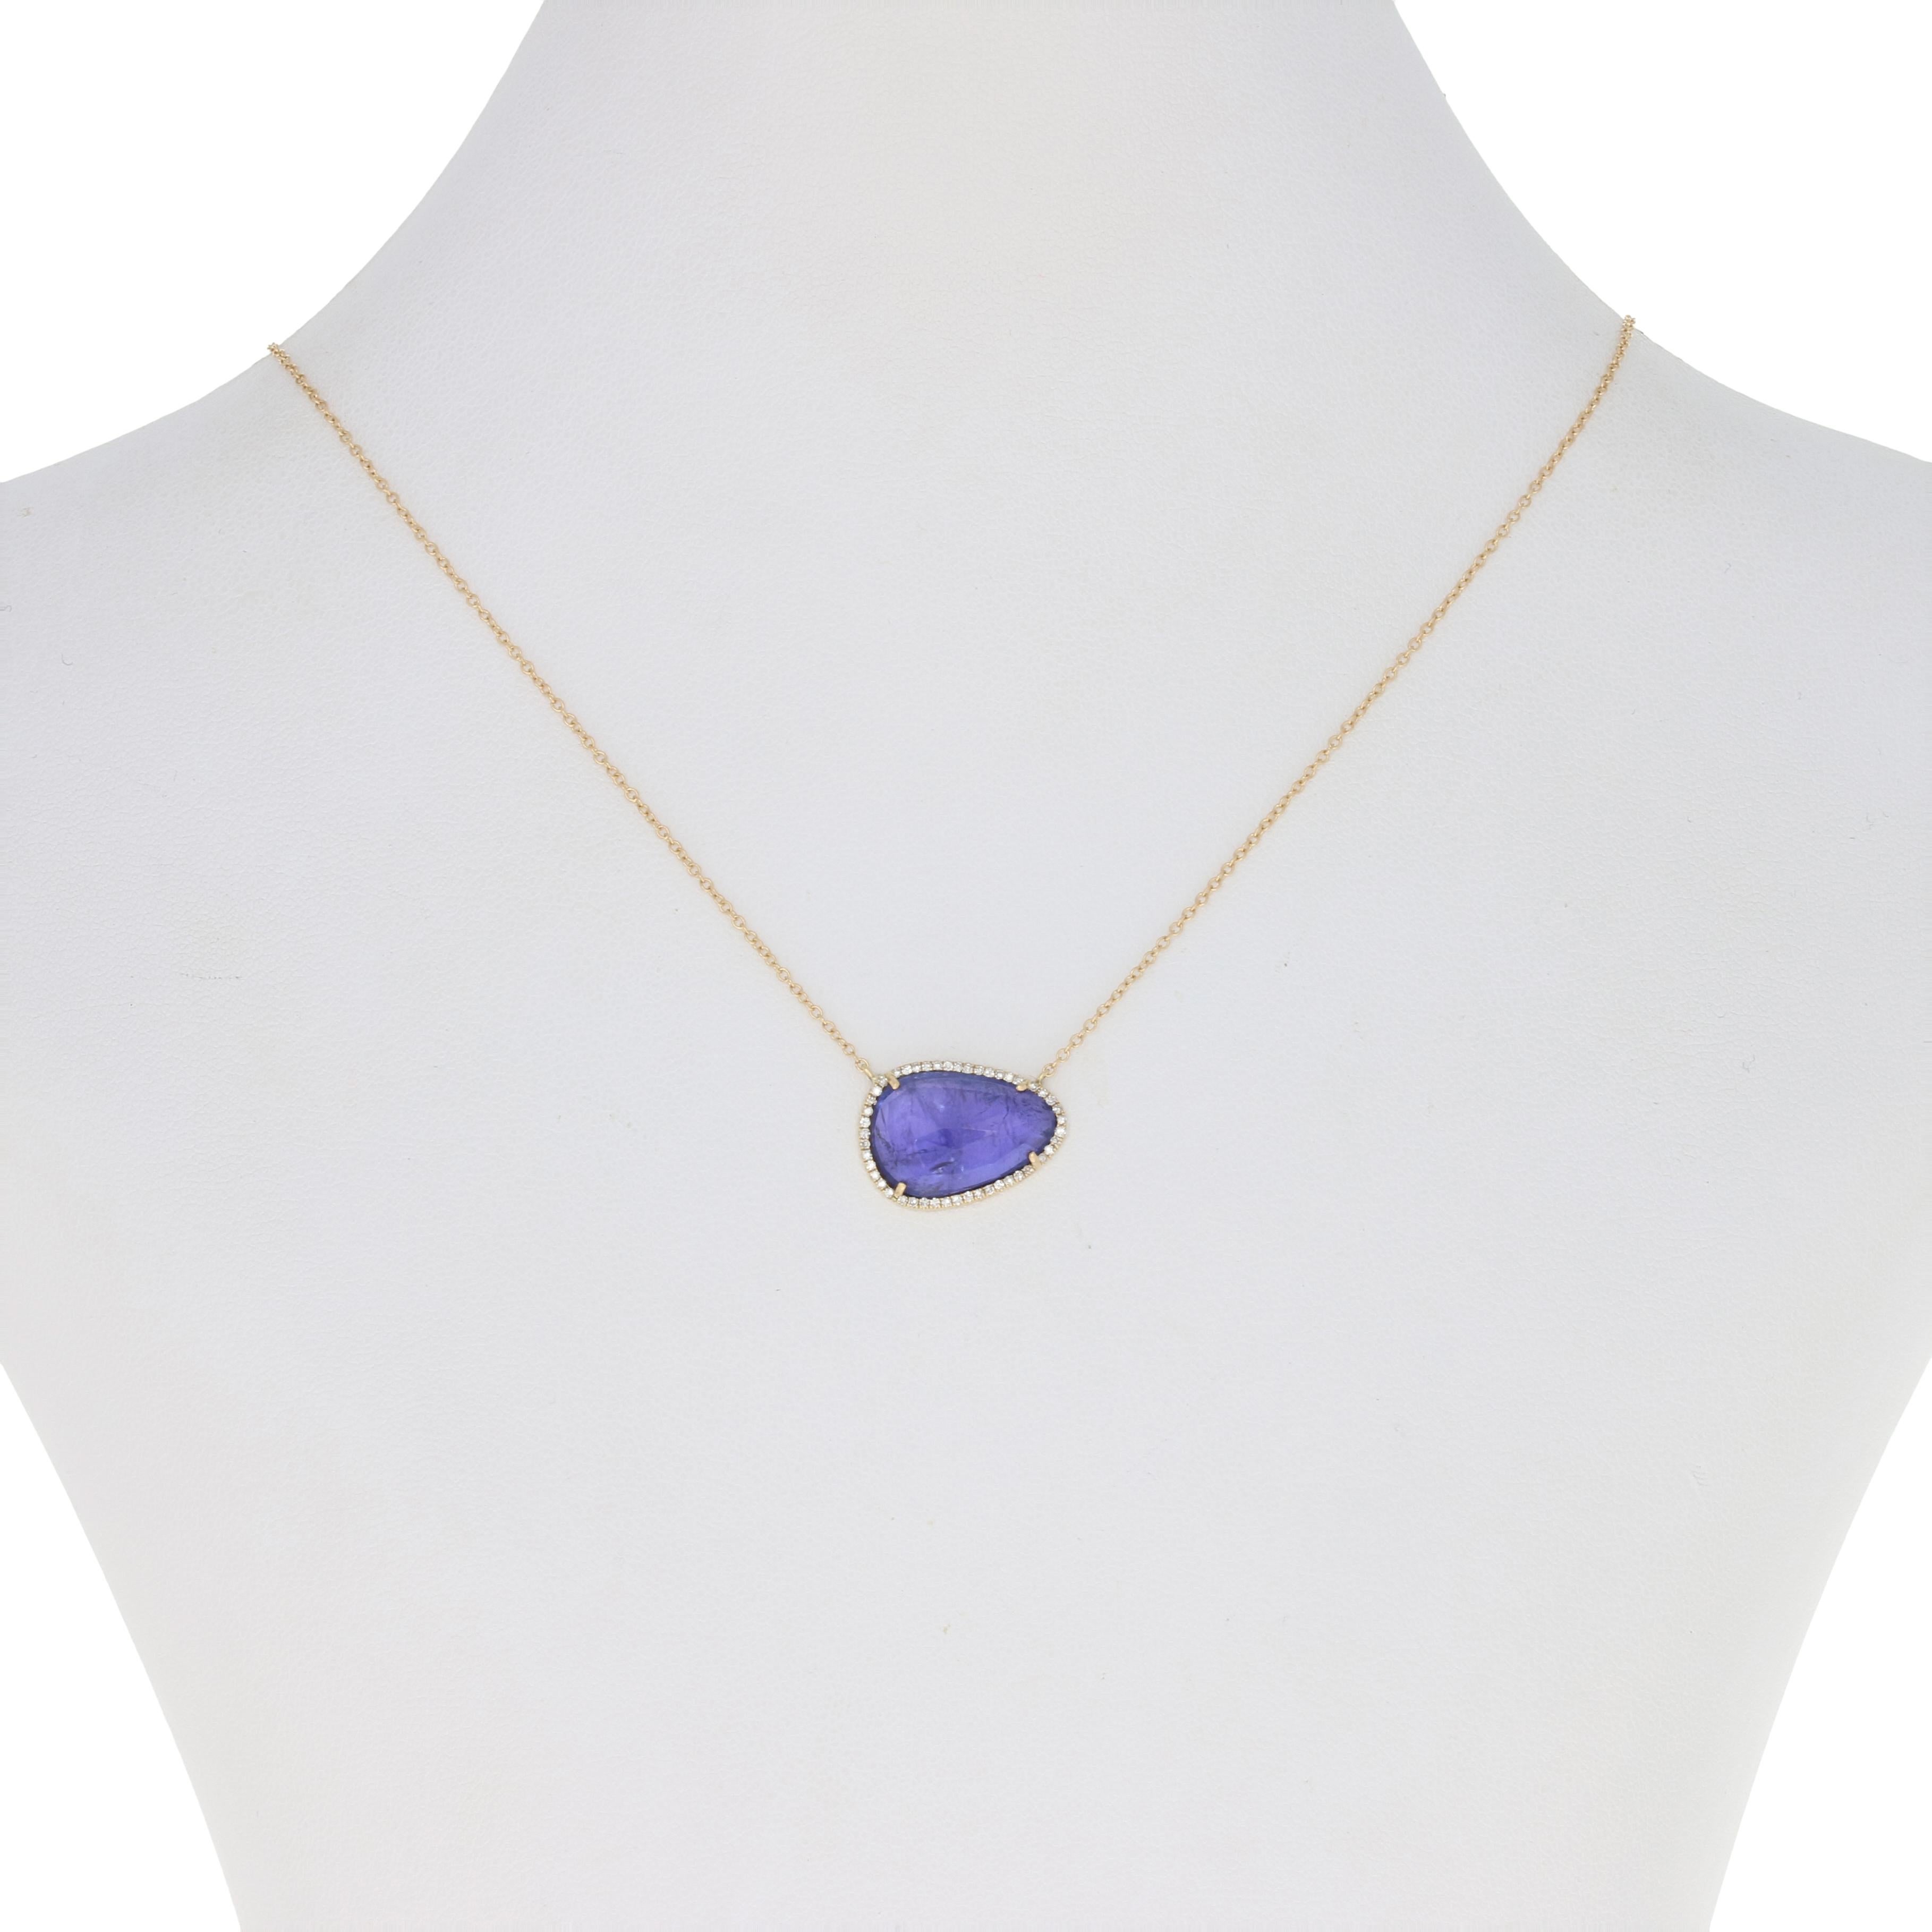 Invigorate your wardrobe with a bright splash of color! Created in 14k yellow gold, this NEW cable chain necklace is adorned with an attached tanzanite pendant framed by sparkling white diamonds. 

Metal Content: Guaranteed 14k Gold as